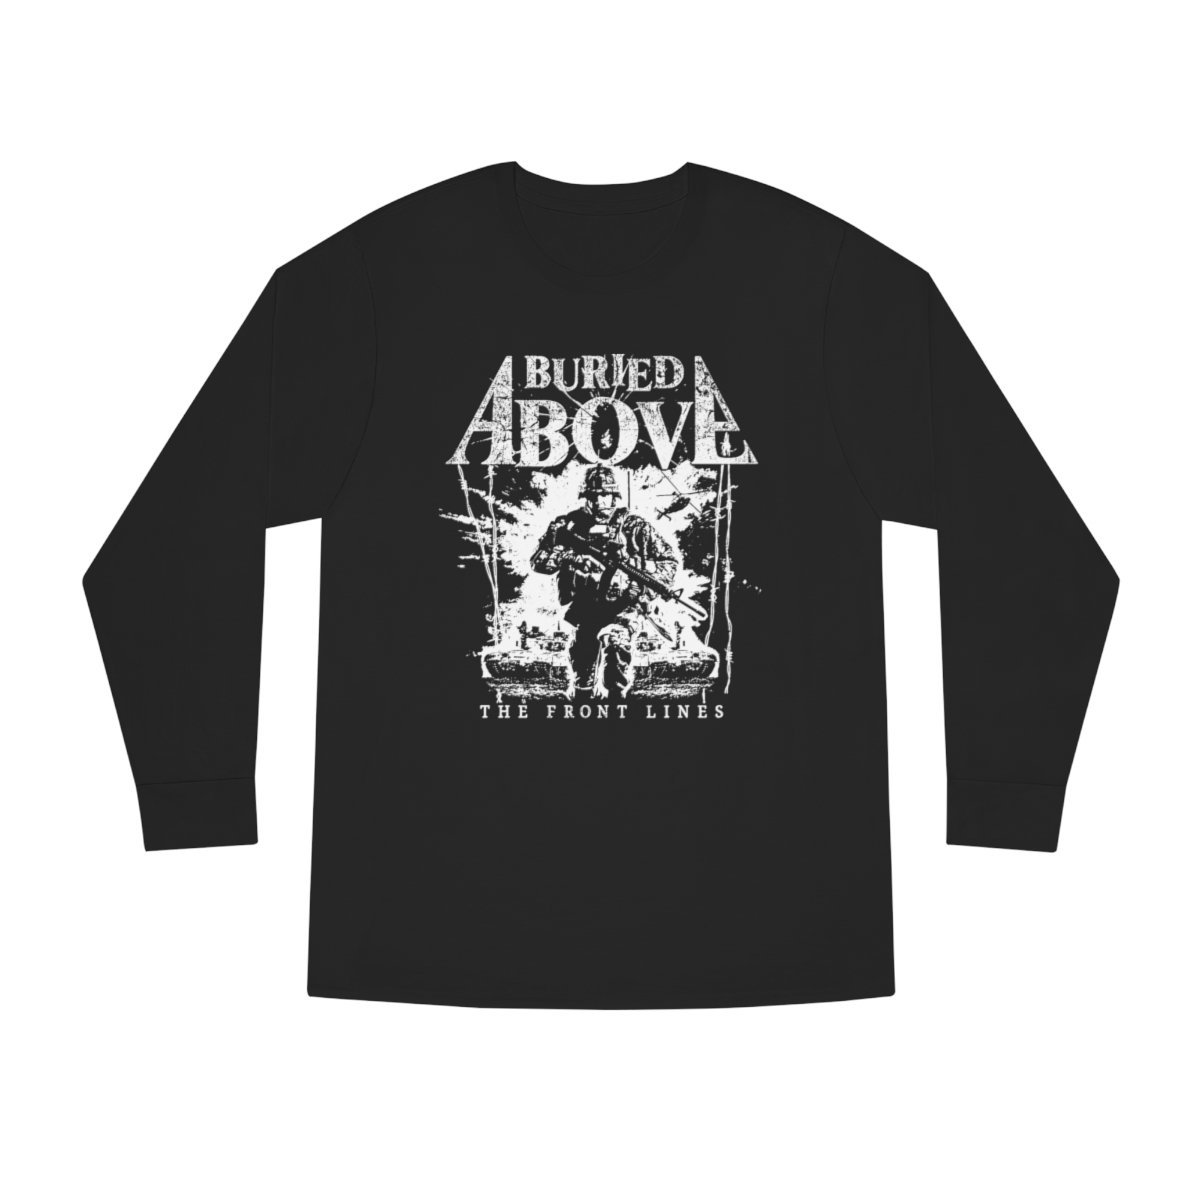 Buried Above – The Front Lines Long Sleeve Crewneck Tshirt